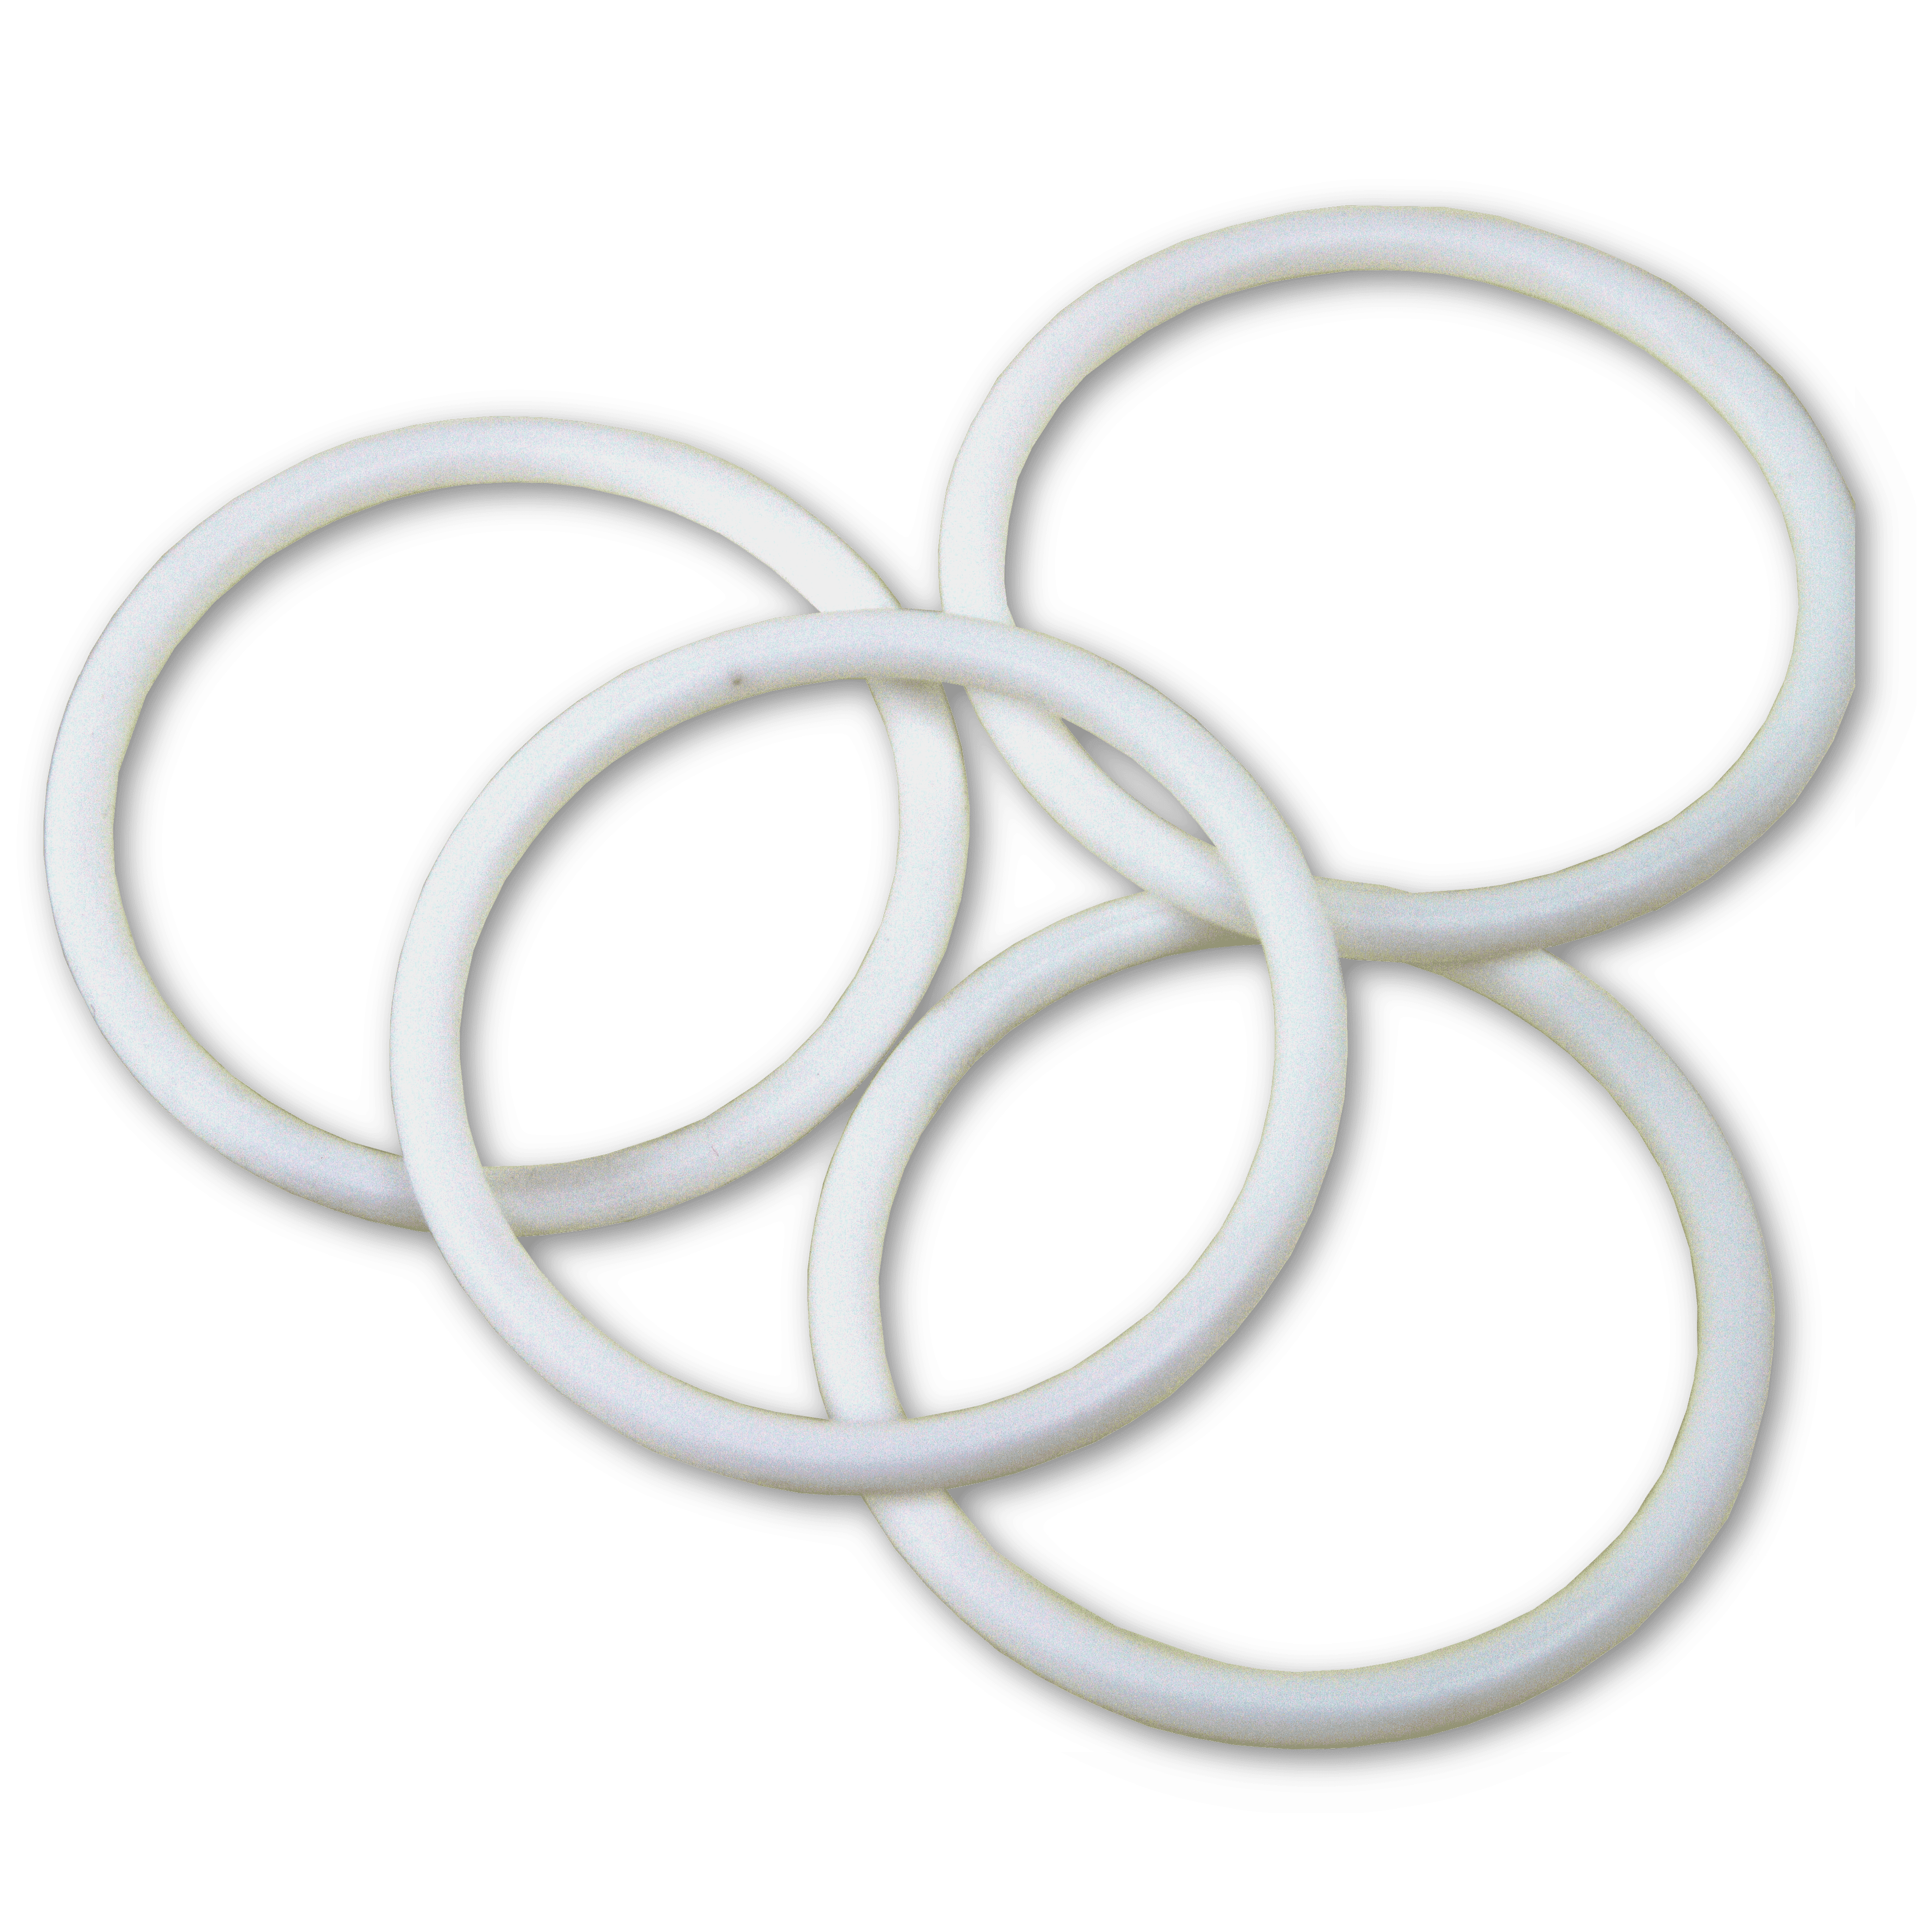 FEP Covered Viton/PTFE Teflon Coated O-ring For Sealing Manufacturers and  Suppliers China - Customized Products Price - SWKS